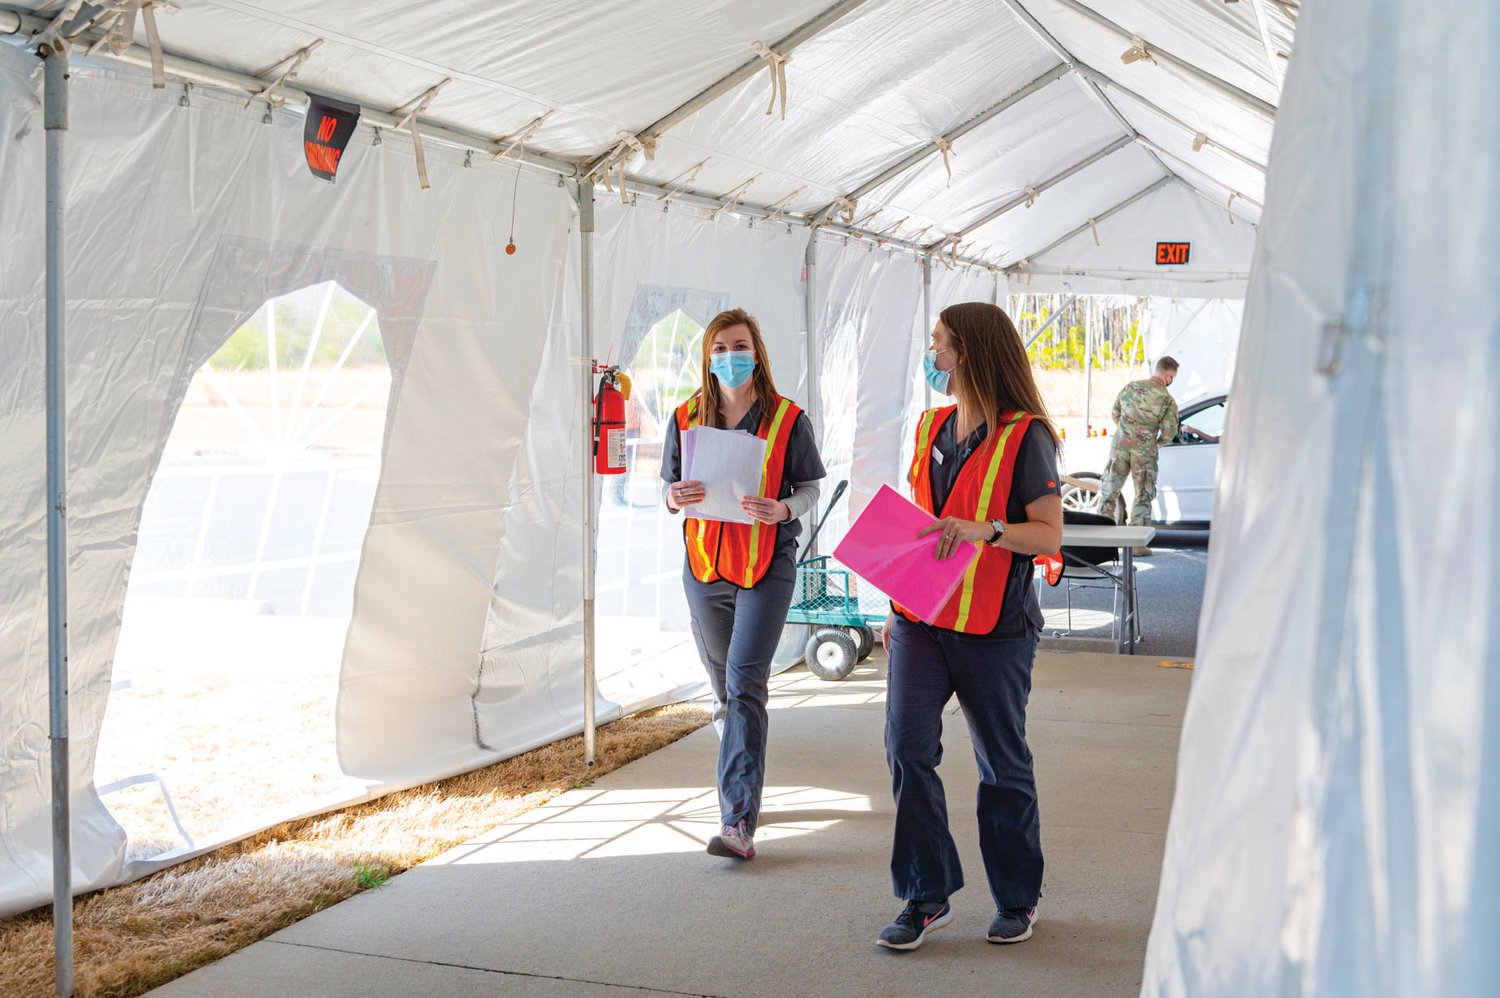 Julia Pitts (left) and Brianna Reeves, nursing students at UNC, act as runners for documents and materials from point to point — a critical component of the Chatham Ag Center's vaccine distribution operation, pictured here in March 2021.